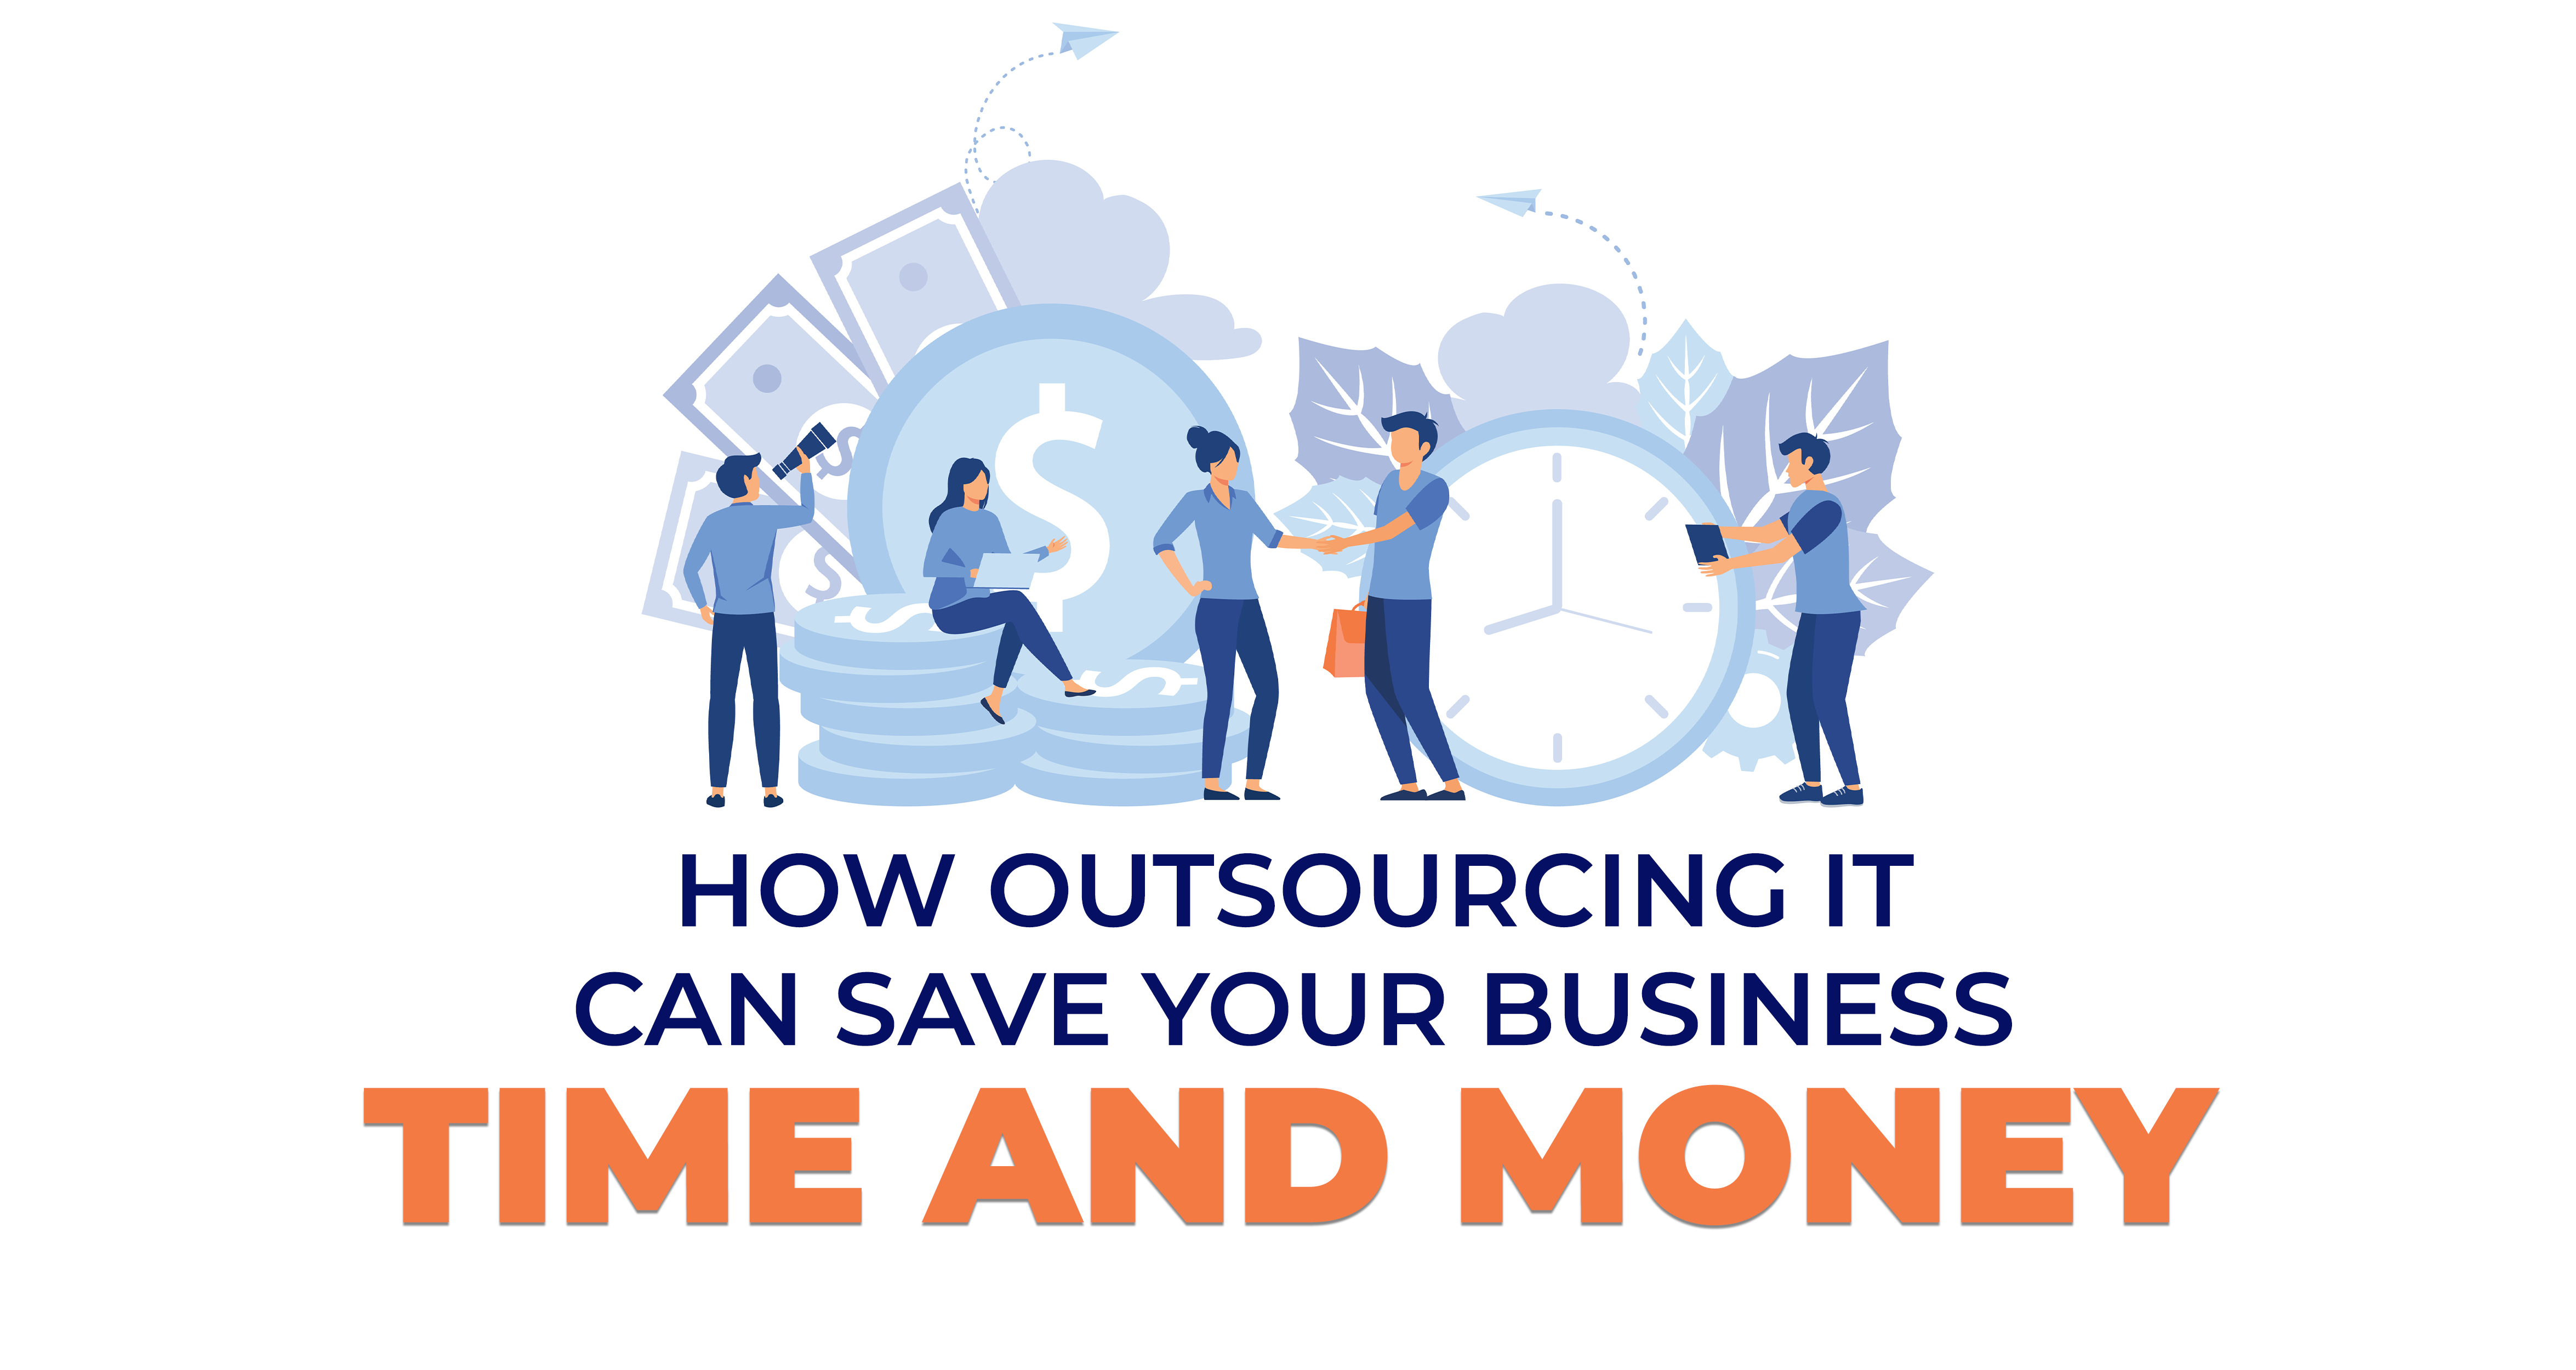 How Outsourcing IT Can Save Your Business Time and Money